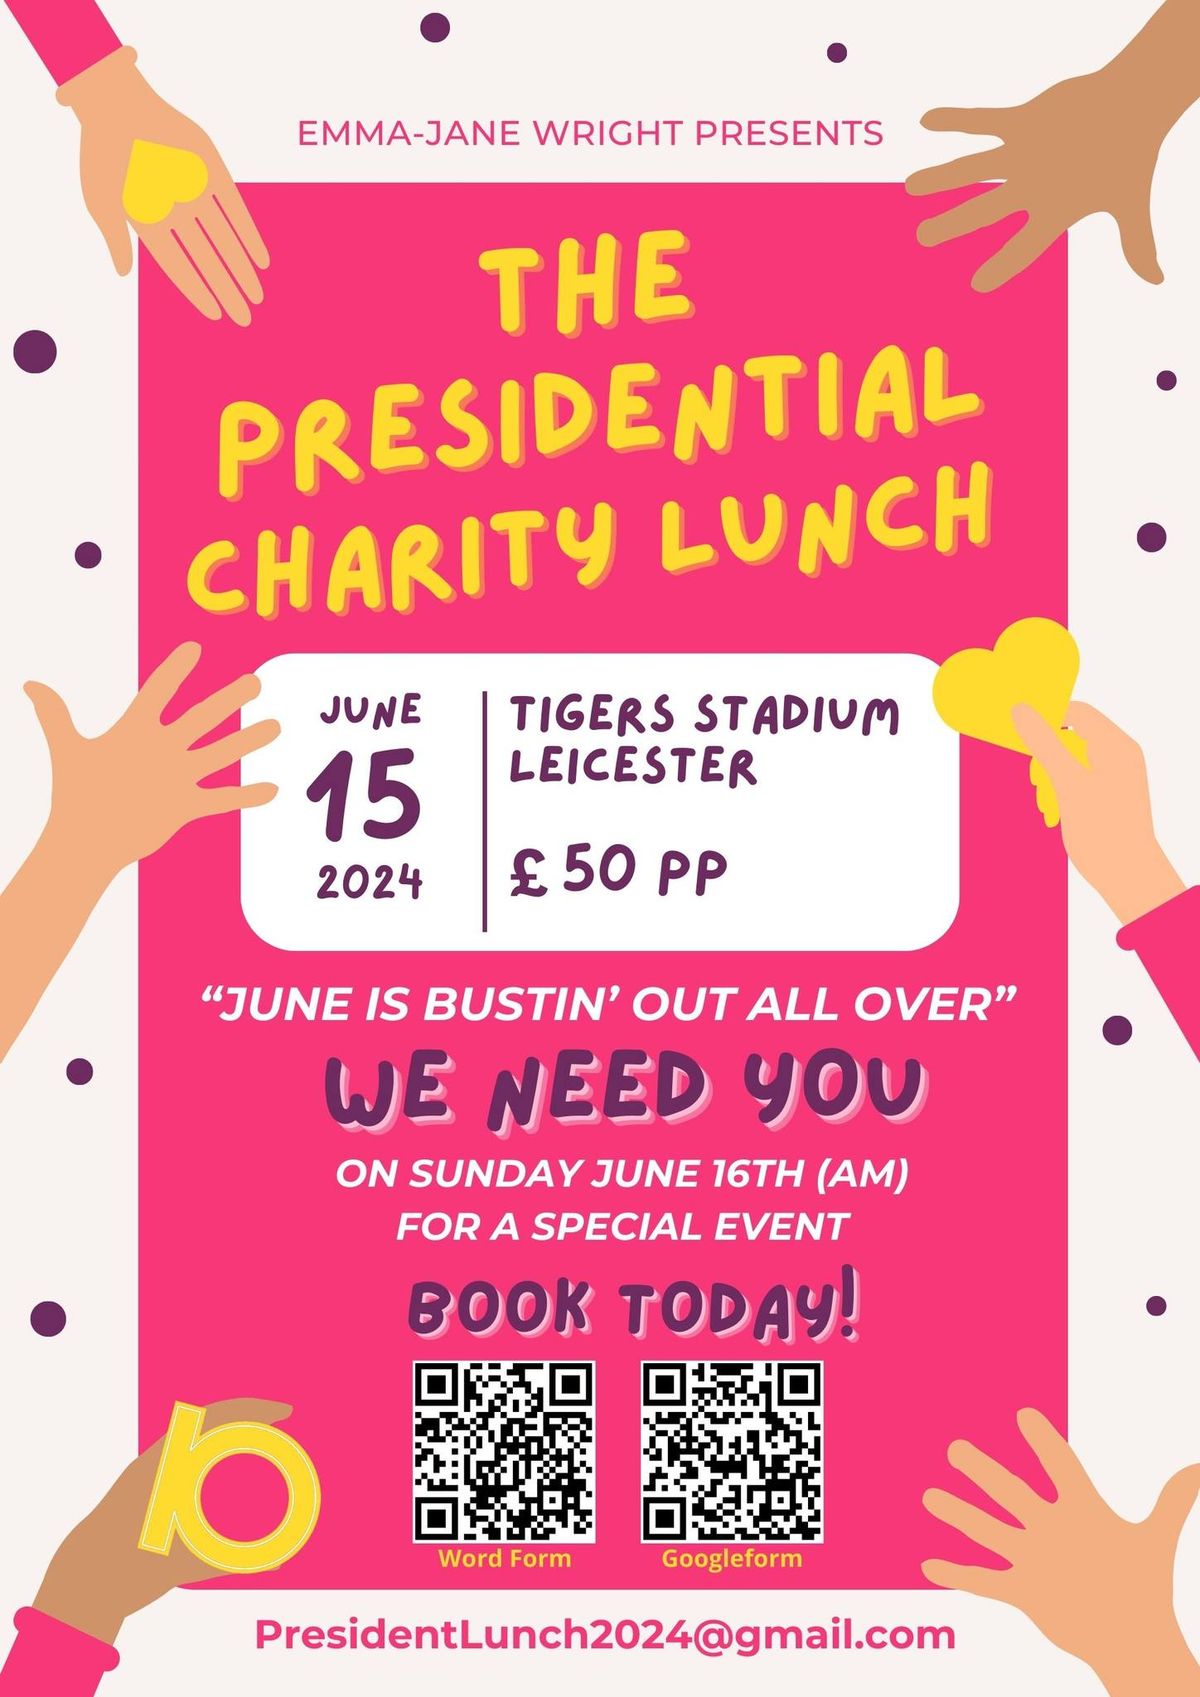 The Presidential Charity Lunch